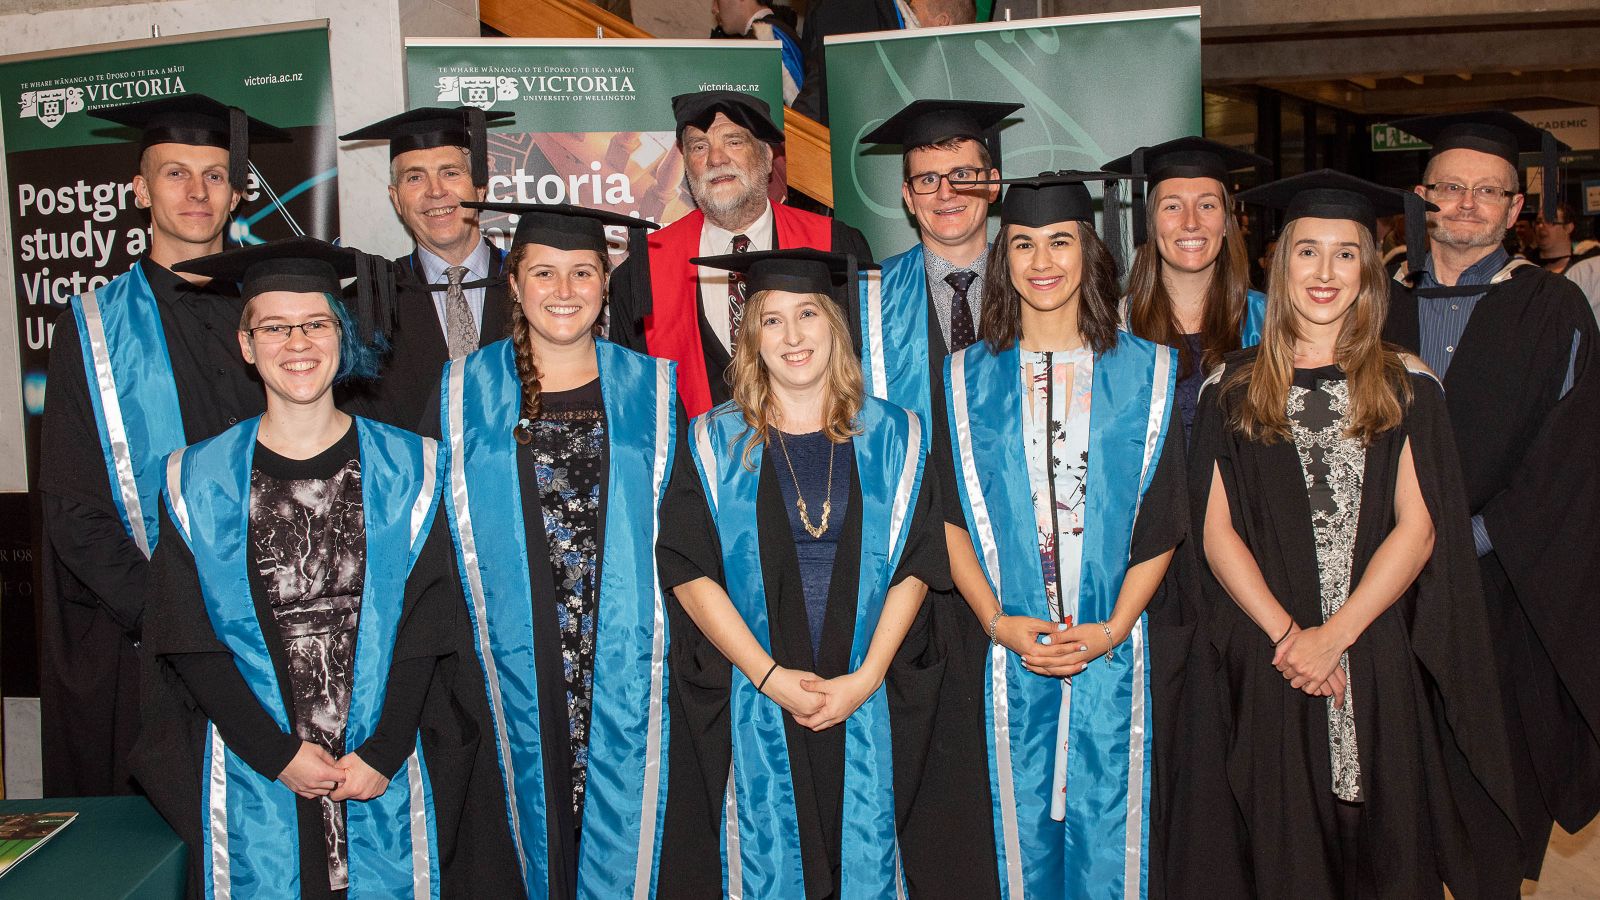 The eight meteorology graduates, wearing graduation gowns and caps, stand in front of Victoria banners with the MetService CEO and the Programme Director, Back row: Lewis Ferris, Peter Lennox (MetService CEO), James McGregor (Programme Director), Andrew James, Ashlee Parkes, Chris Webster (from MetService) Front row: Melissa Oosterwijk, Jessie Owen, Juliane Bergdolt, Tahlia Crabtree, Kathryn Boorman.